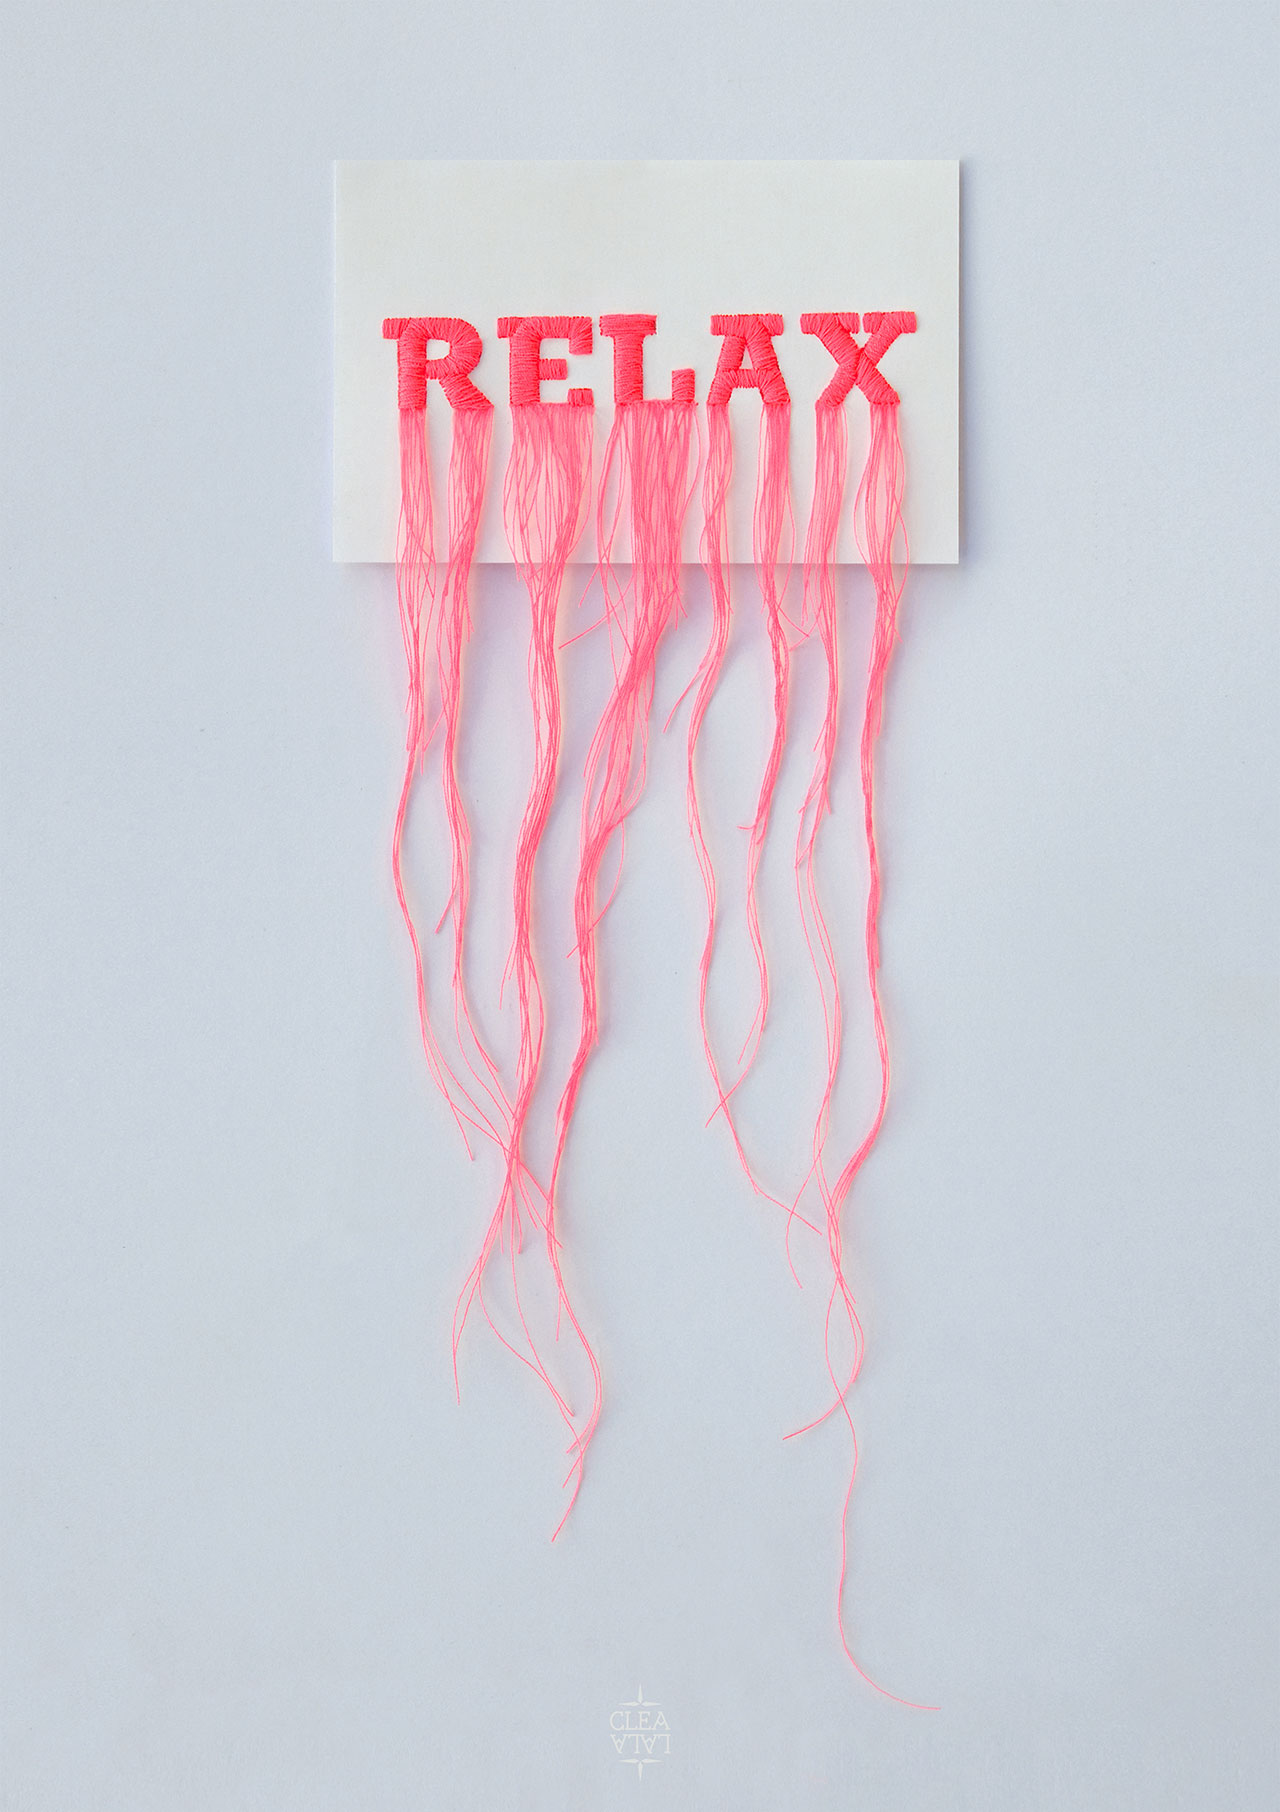 Cléa Lala, Relax, 2015-2017. From the series Humeurs.